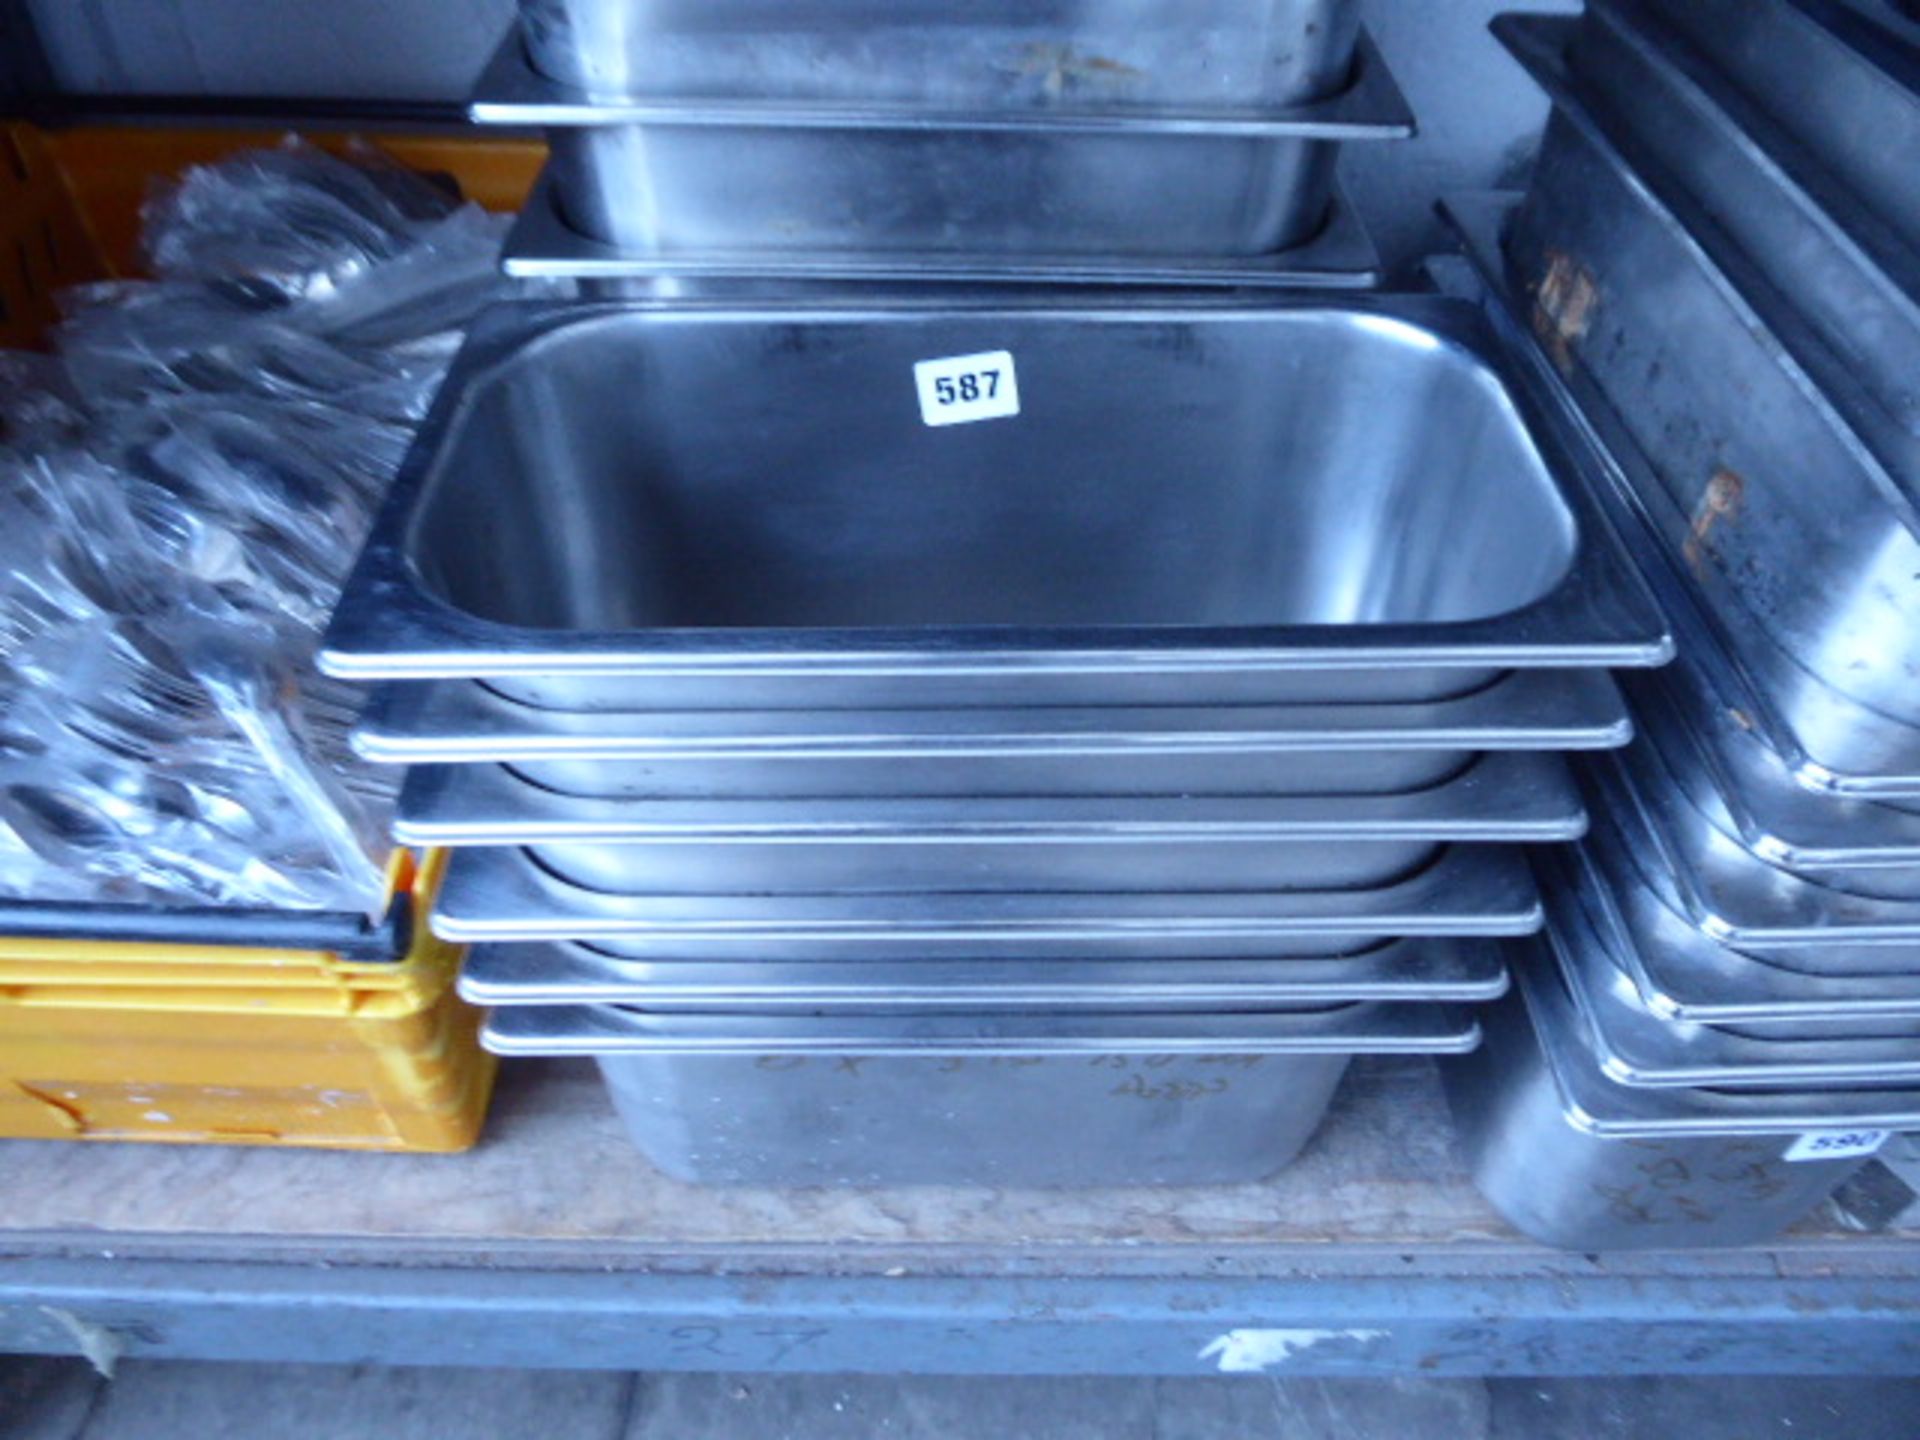 6 stainless steel 1/3 gastronorms 150mm deep